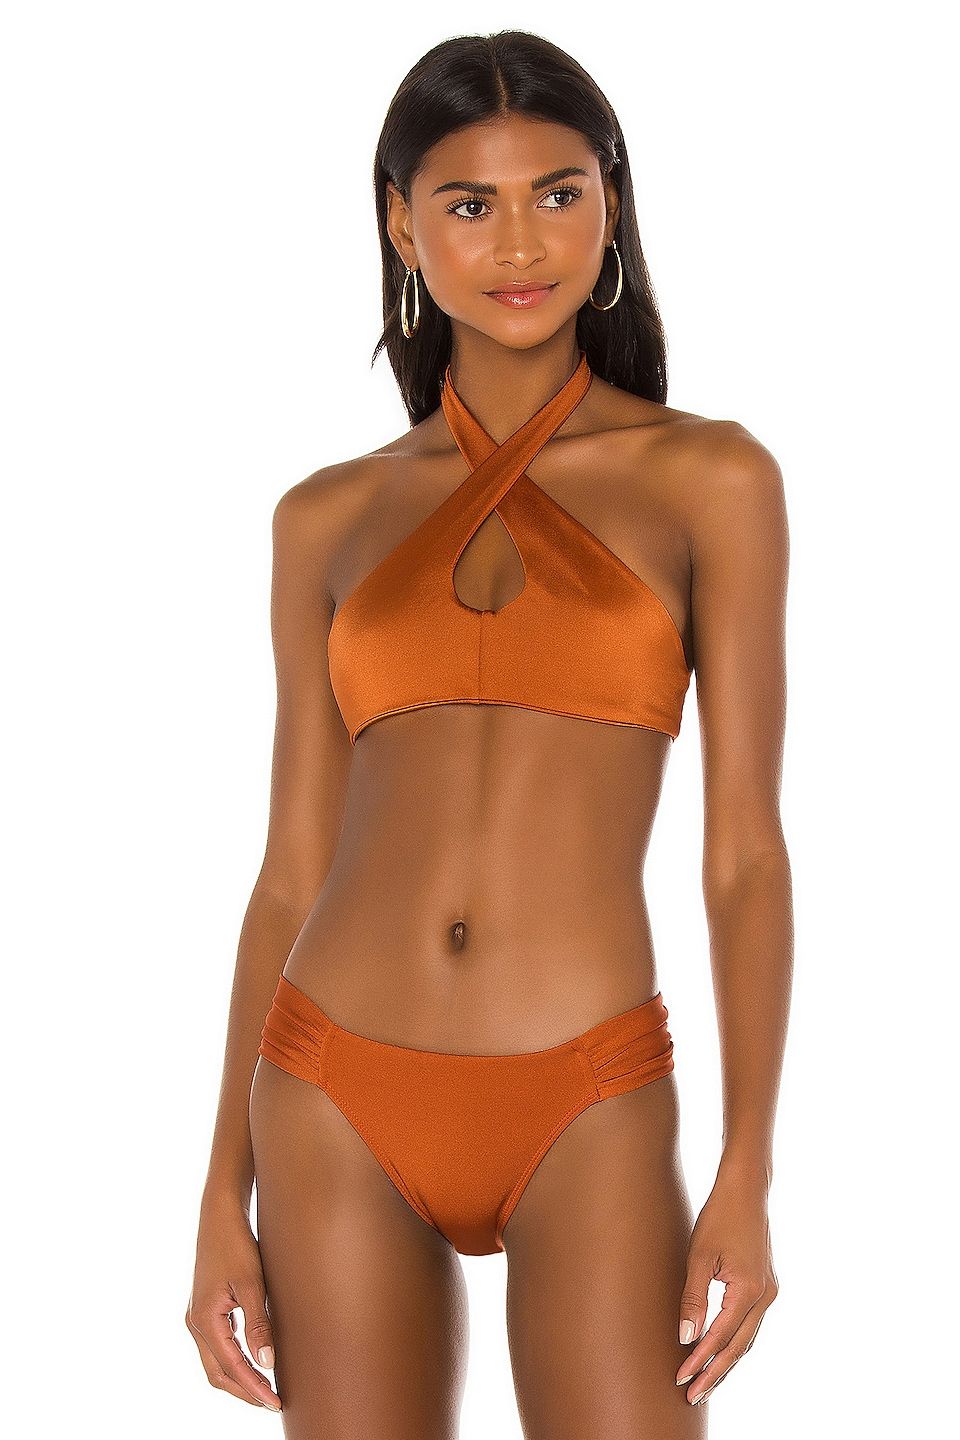 Bikinis for Small Bust, Best Bikini for Small Chest